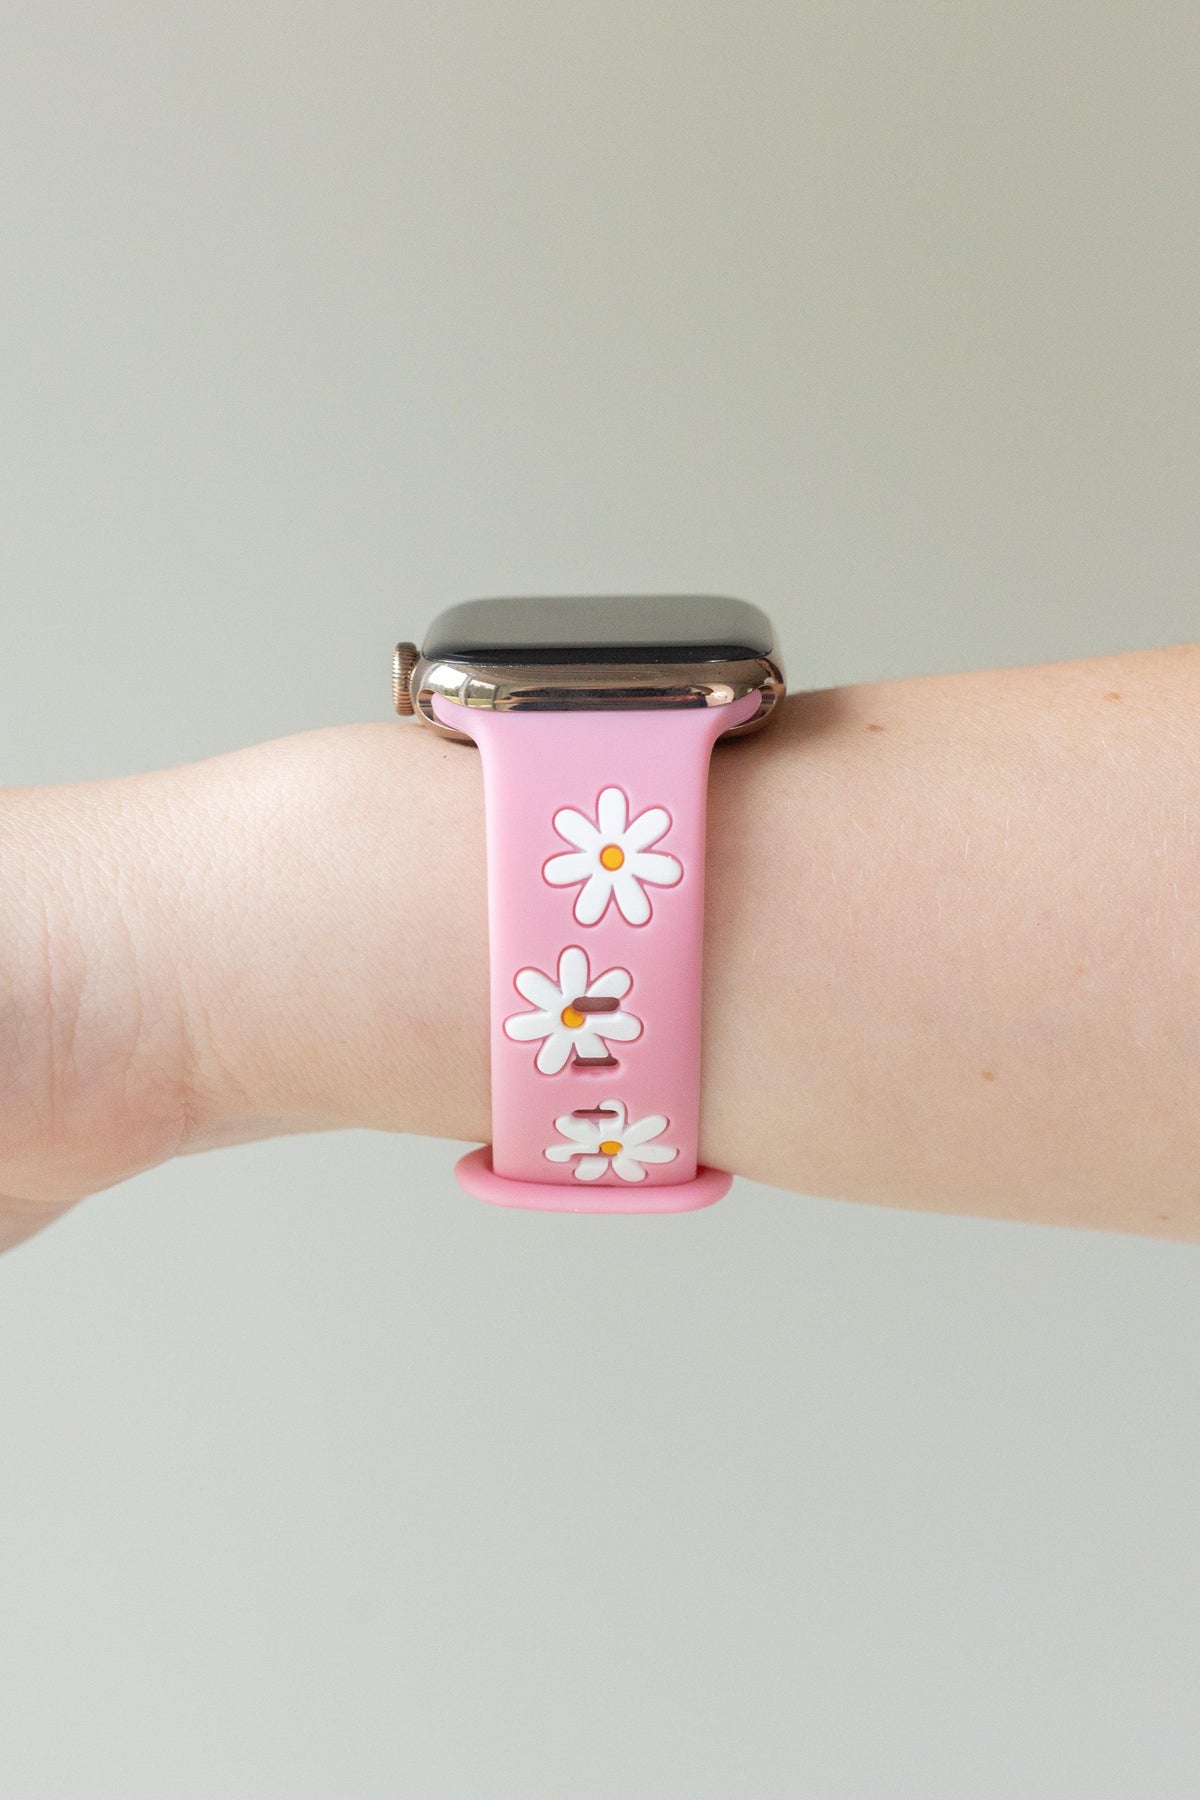 The Finest Fairy Apple Watch Band - Strawberry Avocados